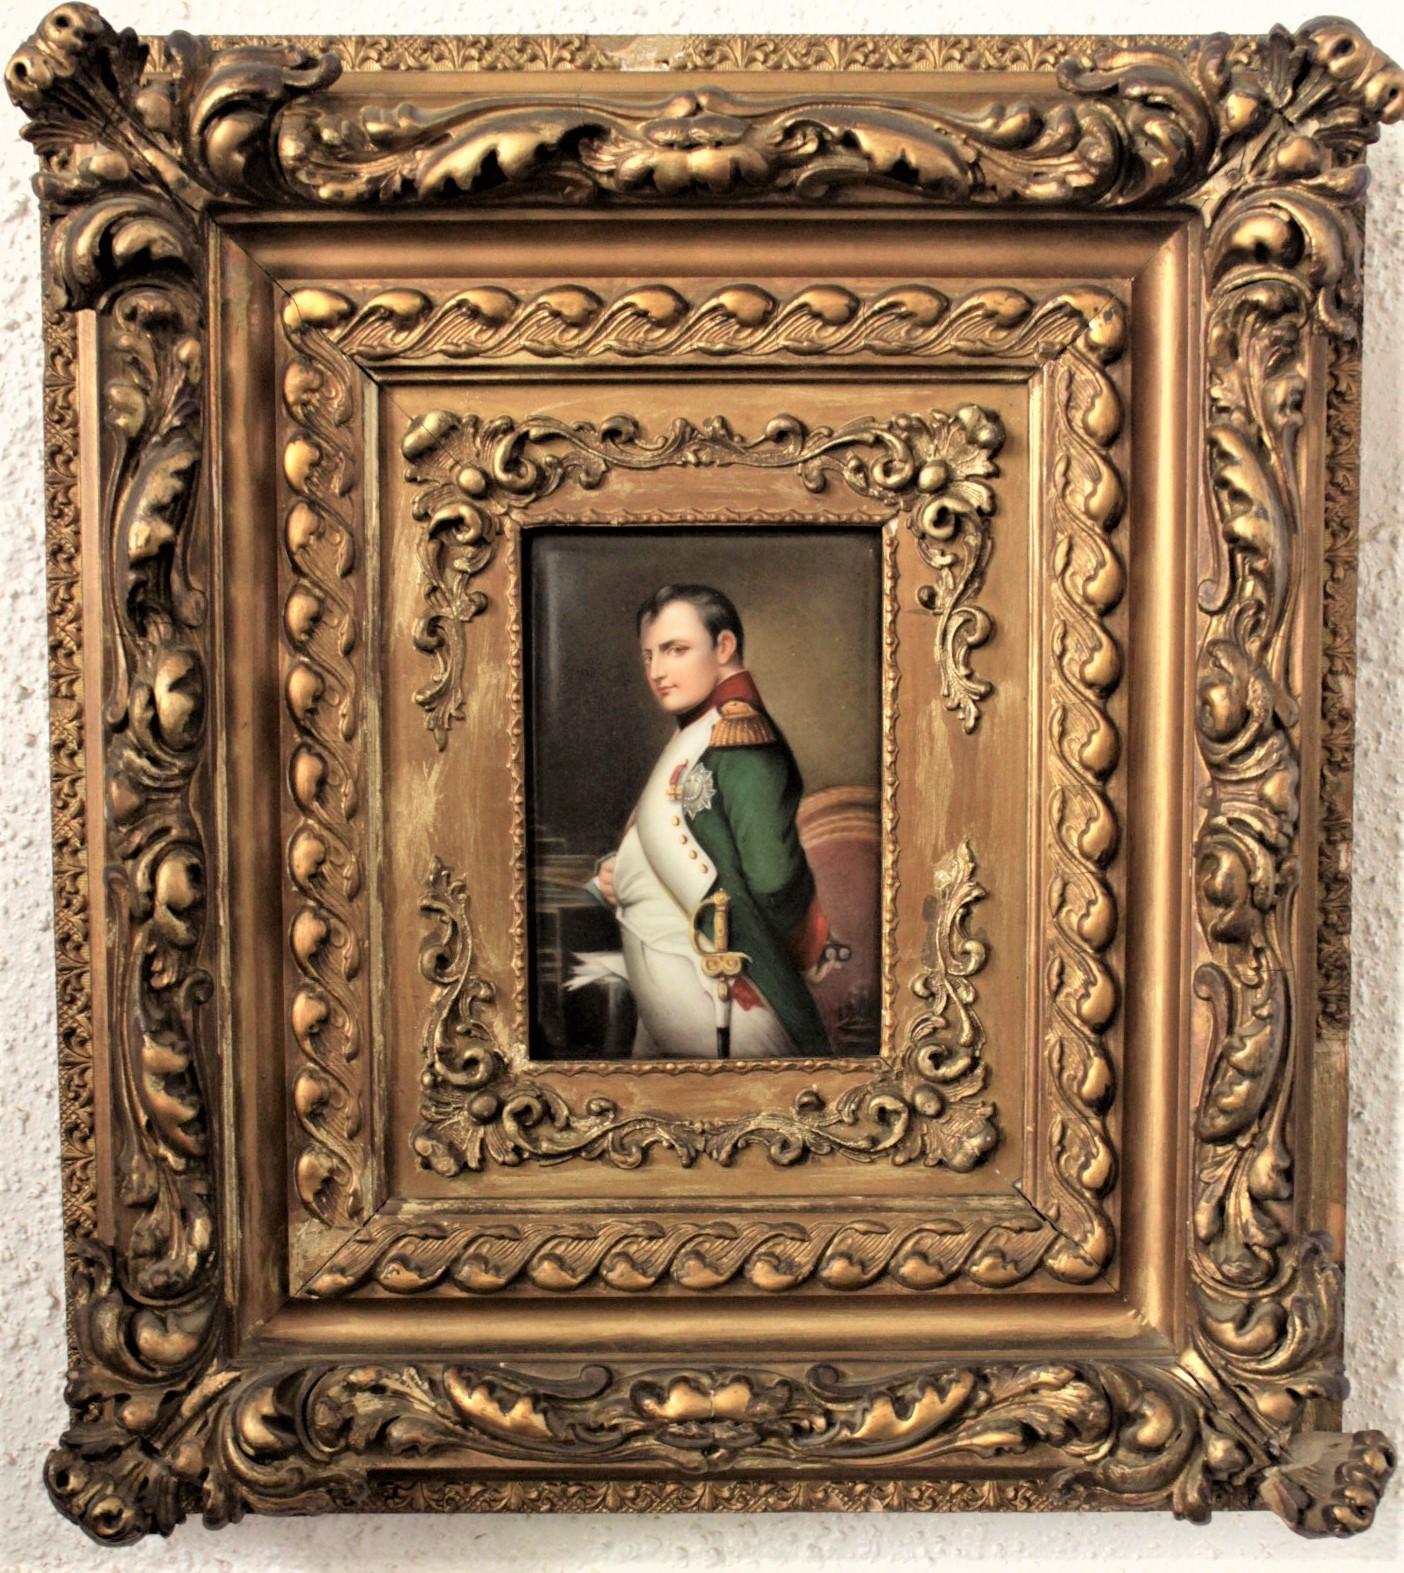 19th Century Antique Hand-Painted Porcelain Framed Plaque or Panel of Napoleon Bonaparte For Sale